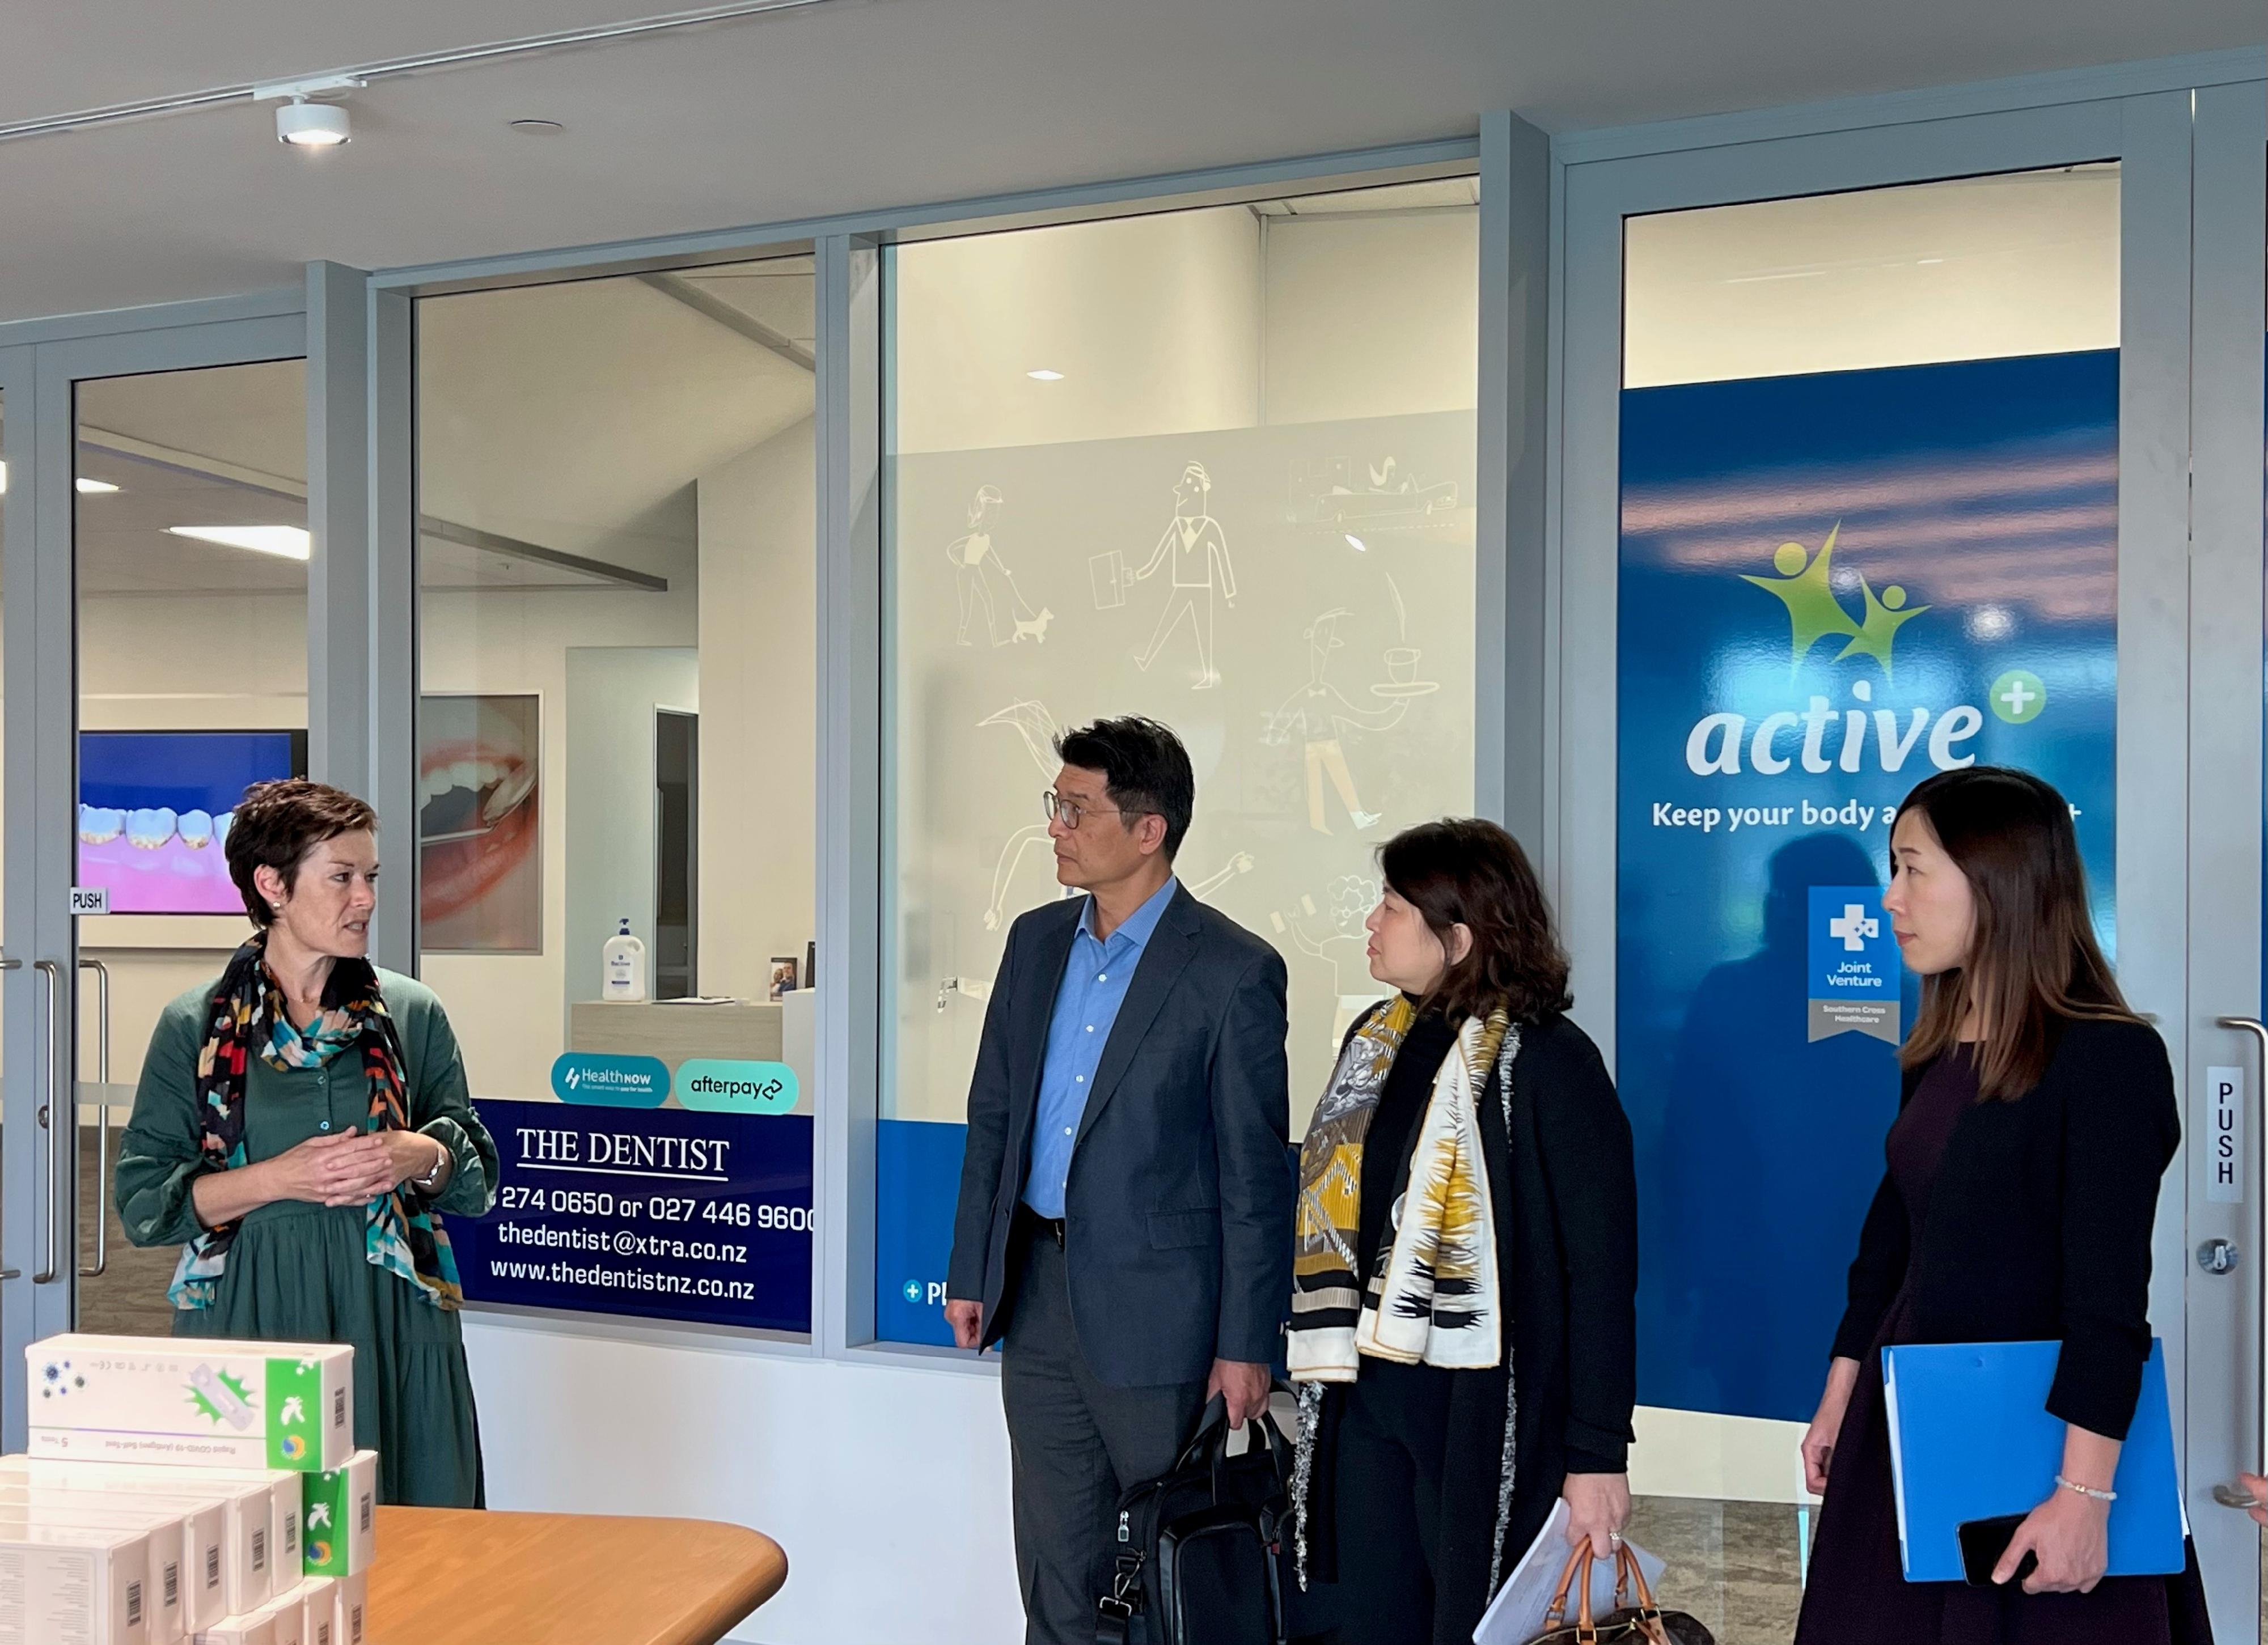 The Under Secretary for Health, Dr Libby Lee (second right), and the Commissioner for Primary Healthcare, Dr Pang Fei-chau (second left), visited a general practice clinic on October 10 (Auckland time) in Auckland, New Zealand, to learn about its operation in delivering primary healthcare services under government subsidies.